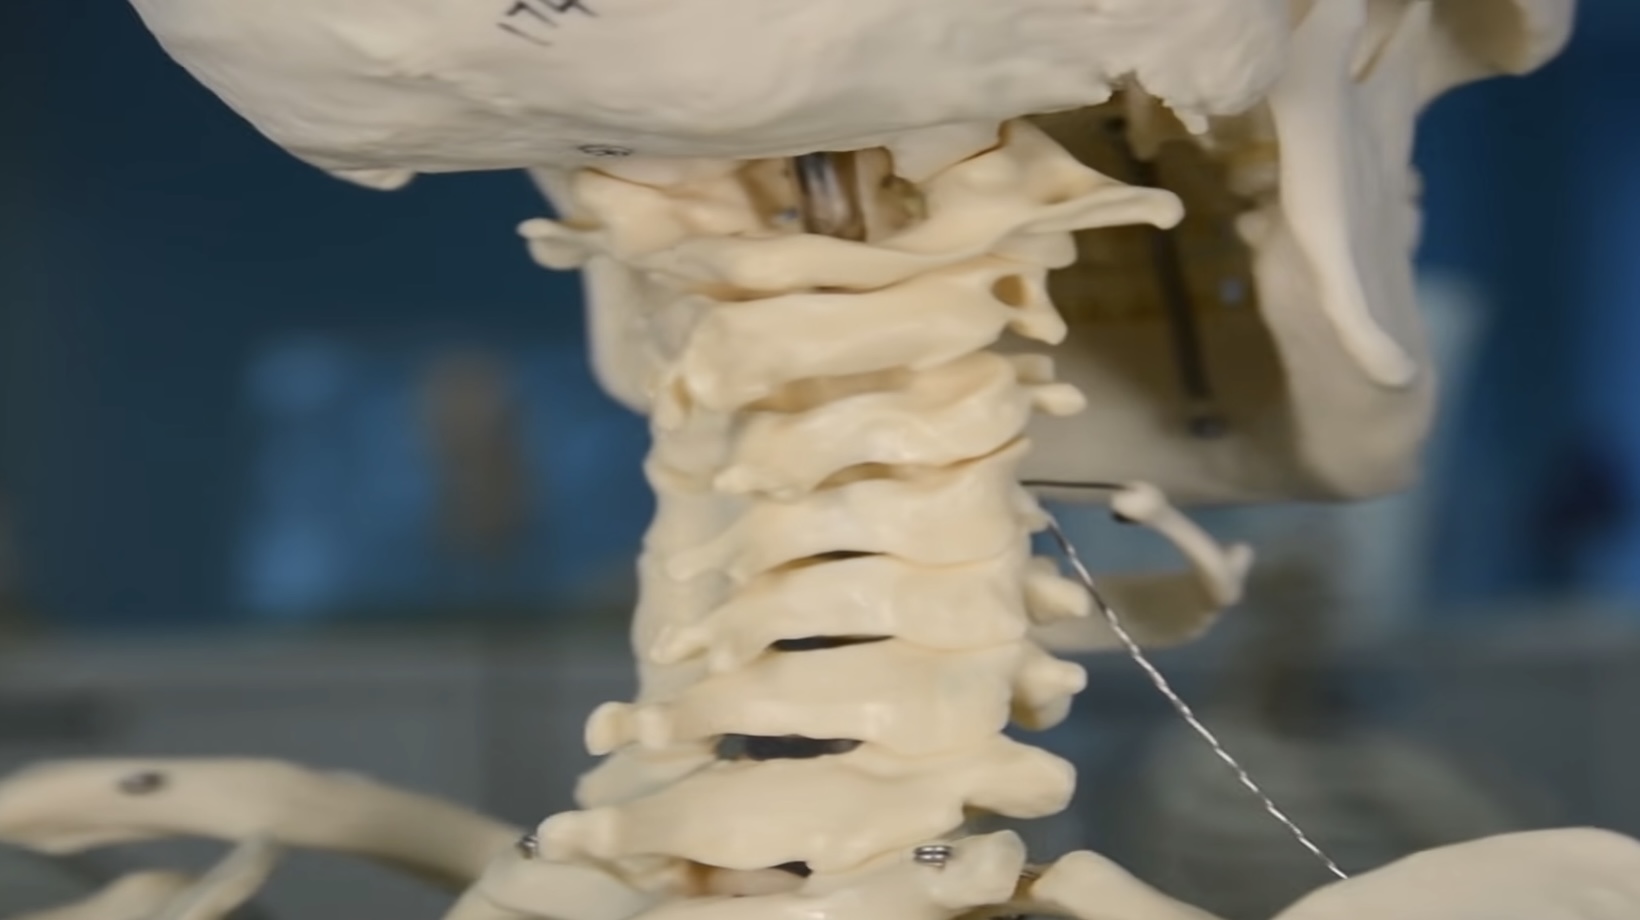 name the vertebral projection oriented in a median plane